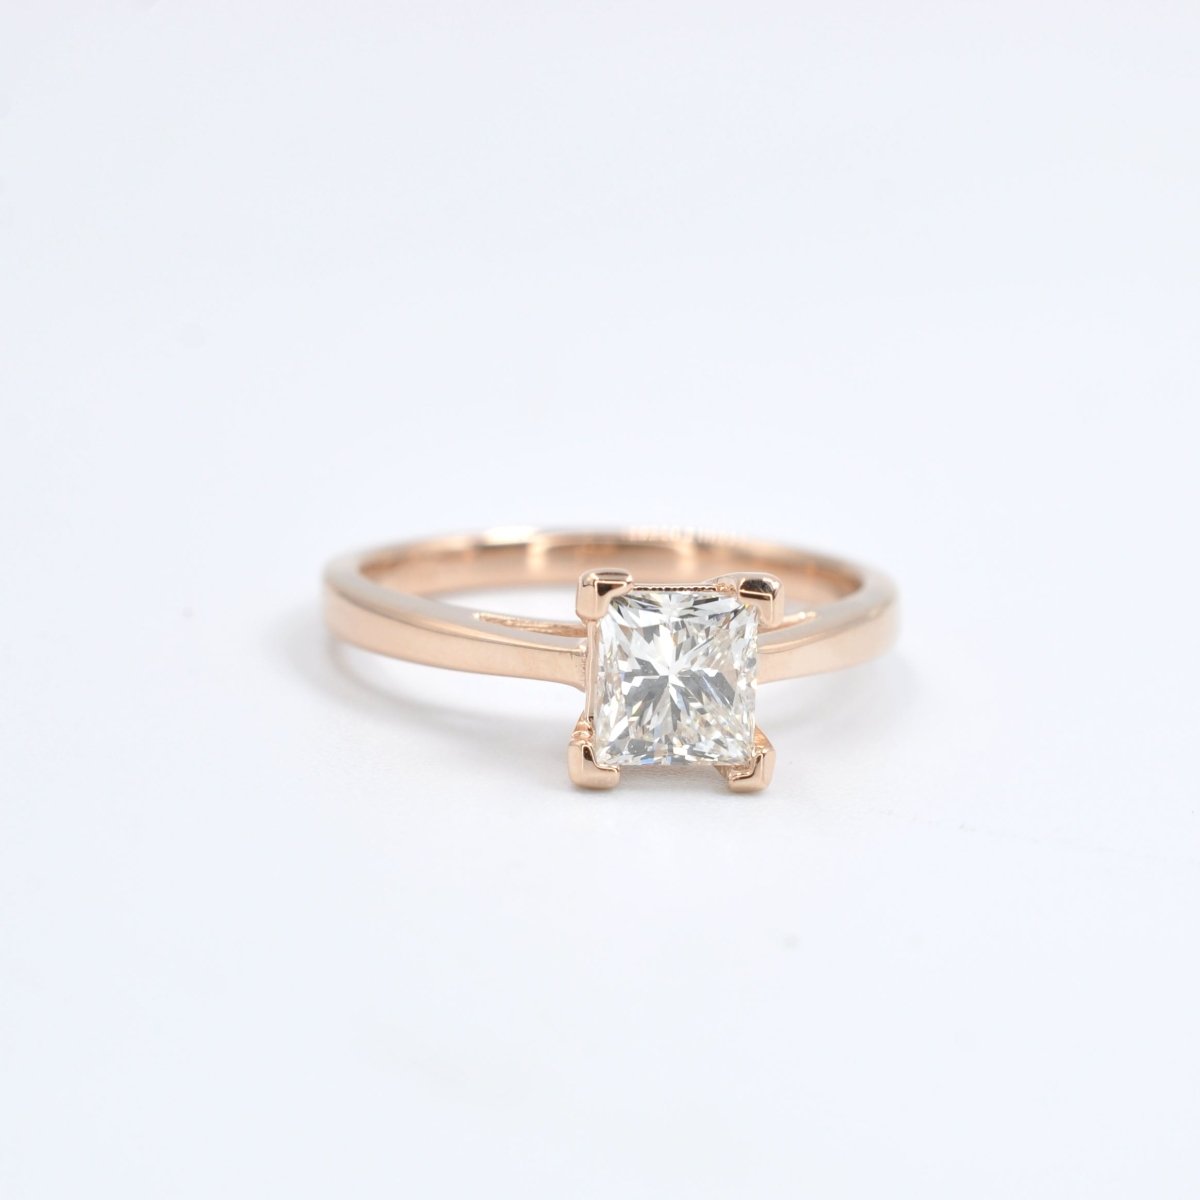 Selected 1.00CT Princess Cut Diamond Solitaire Ring in 14KT Rose Gold - Primestyle.com